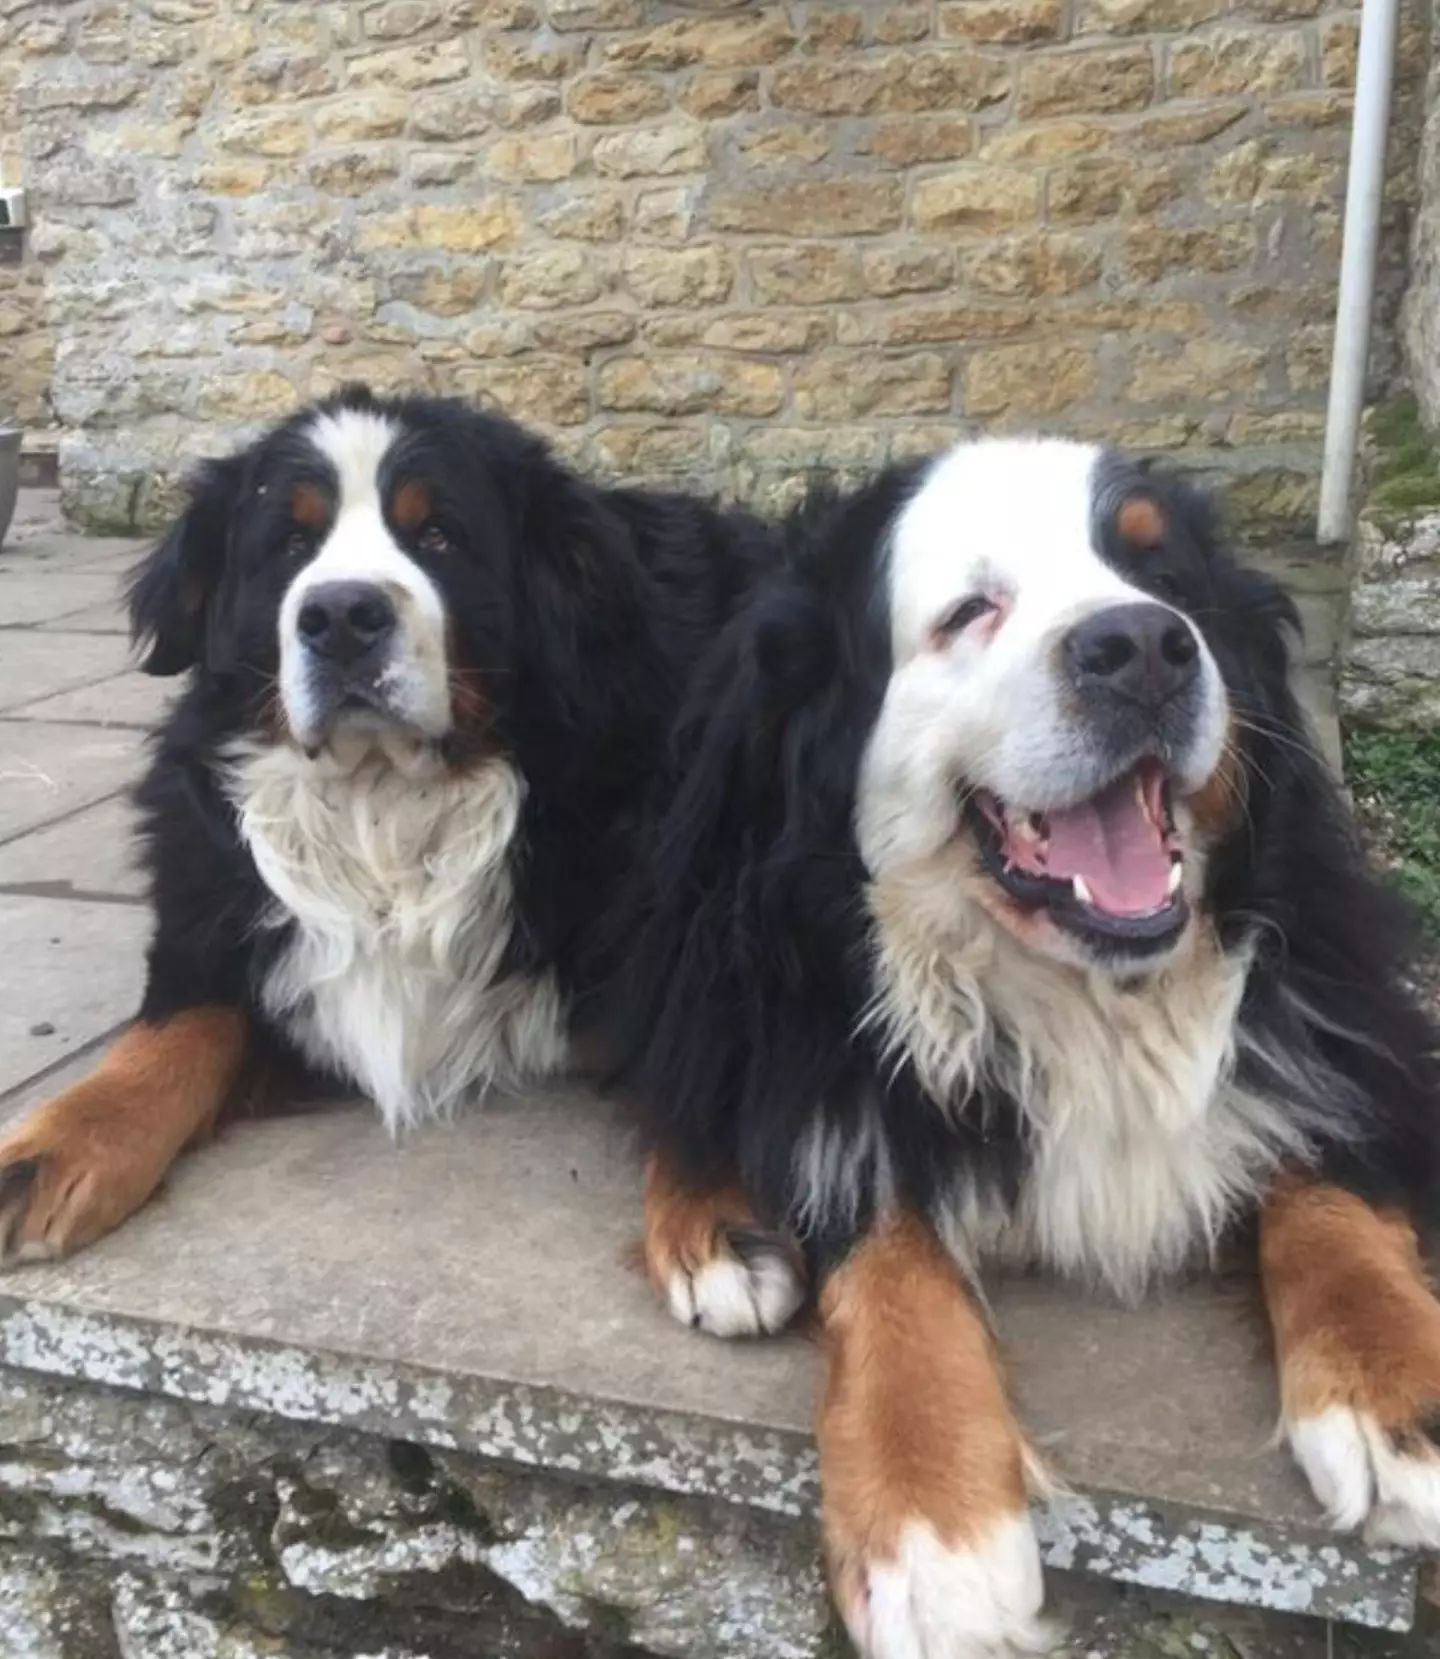 Andrea Brown’s two Bernese Mountain dogs, Banjo and Bisto, were left in the care of a dog walker.